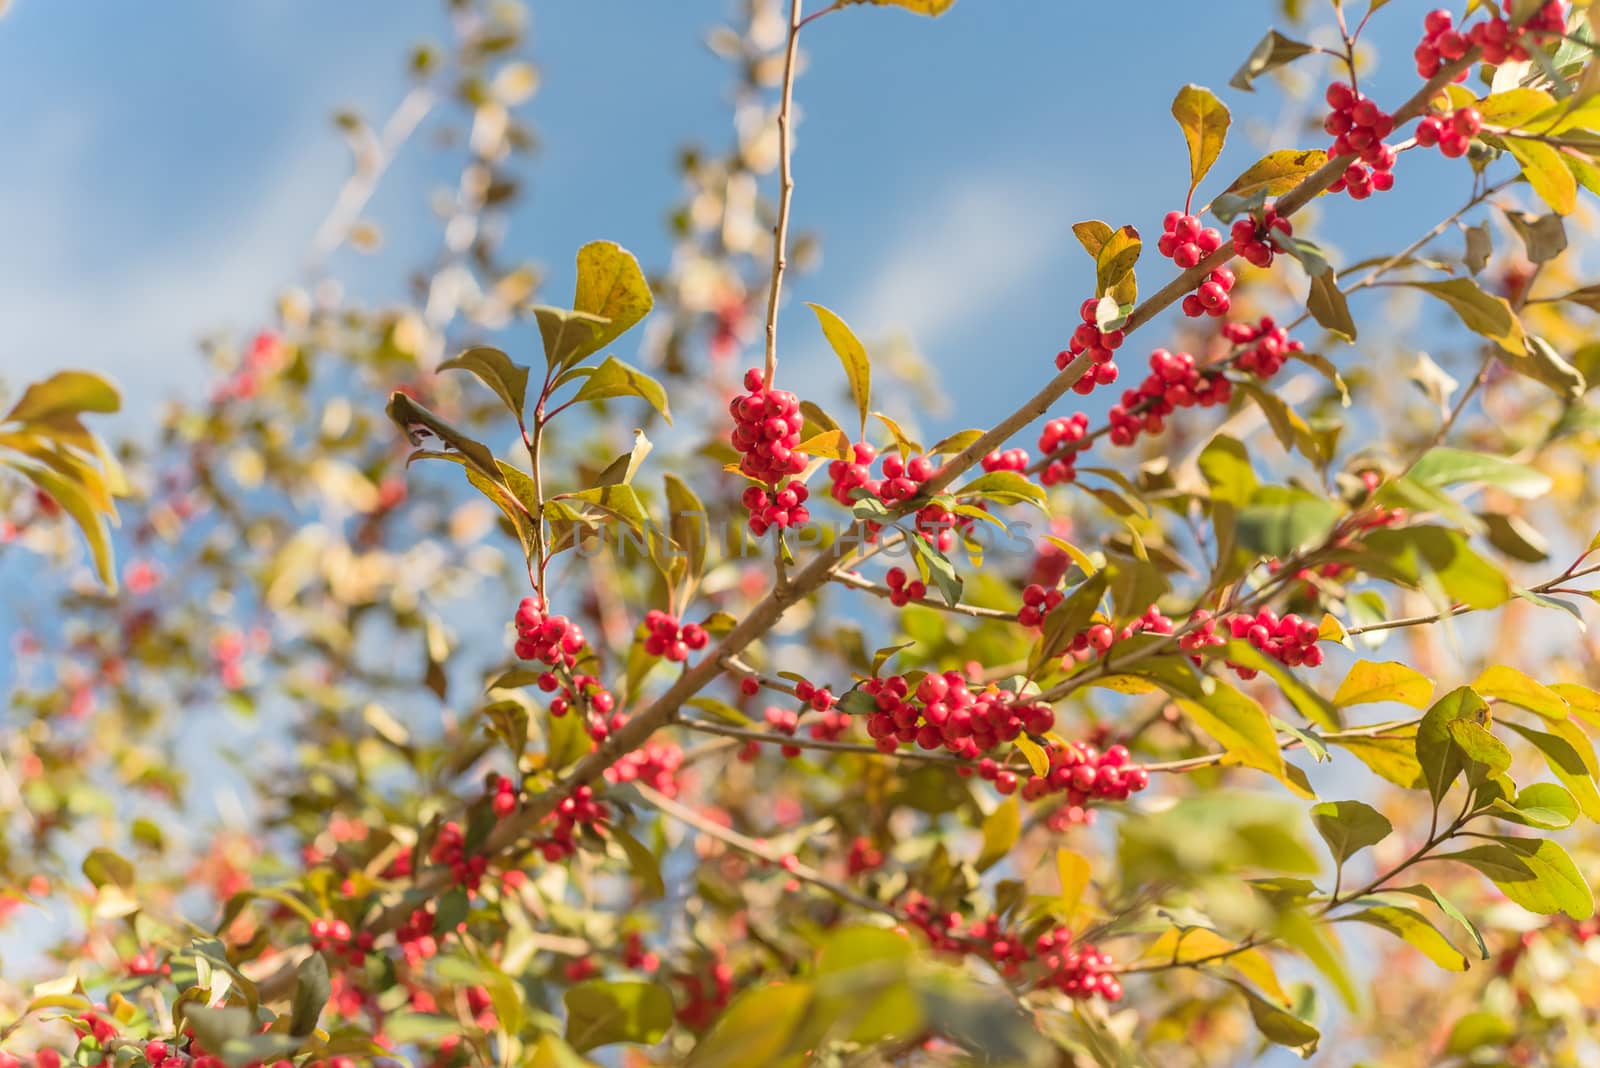 Beautiful Texas Winterberry Ilex Decidua red fruits on tree branches on sunny fall day by trongnguyen